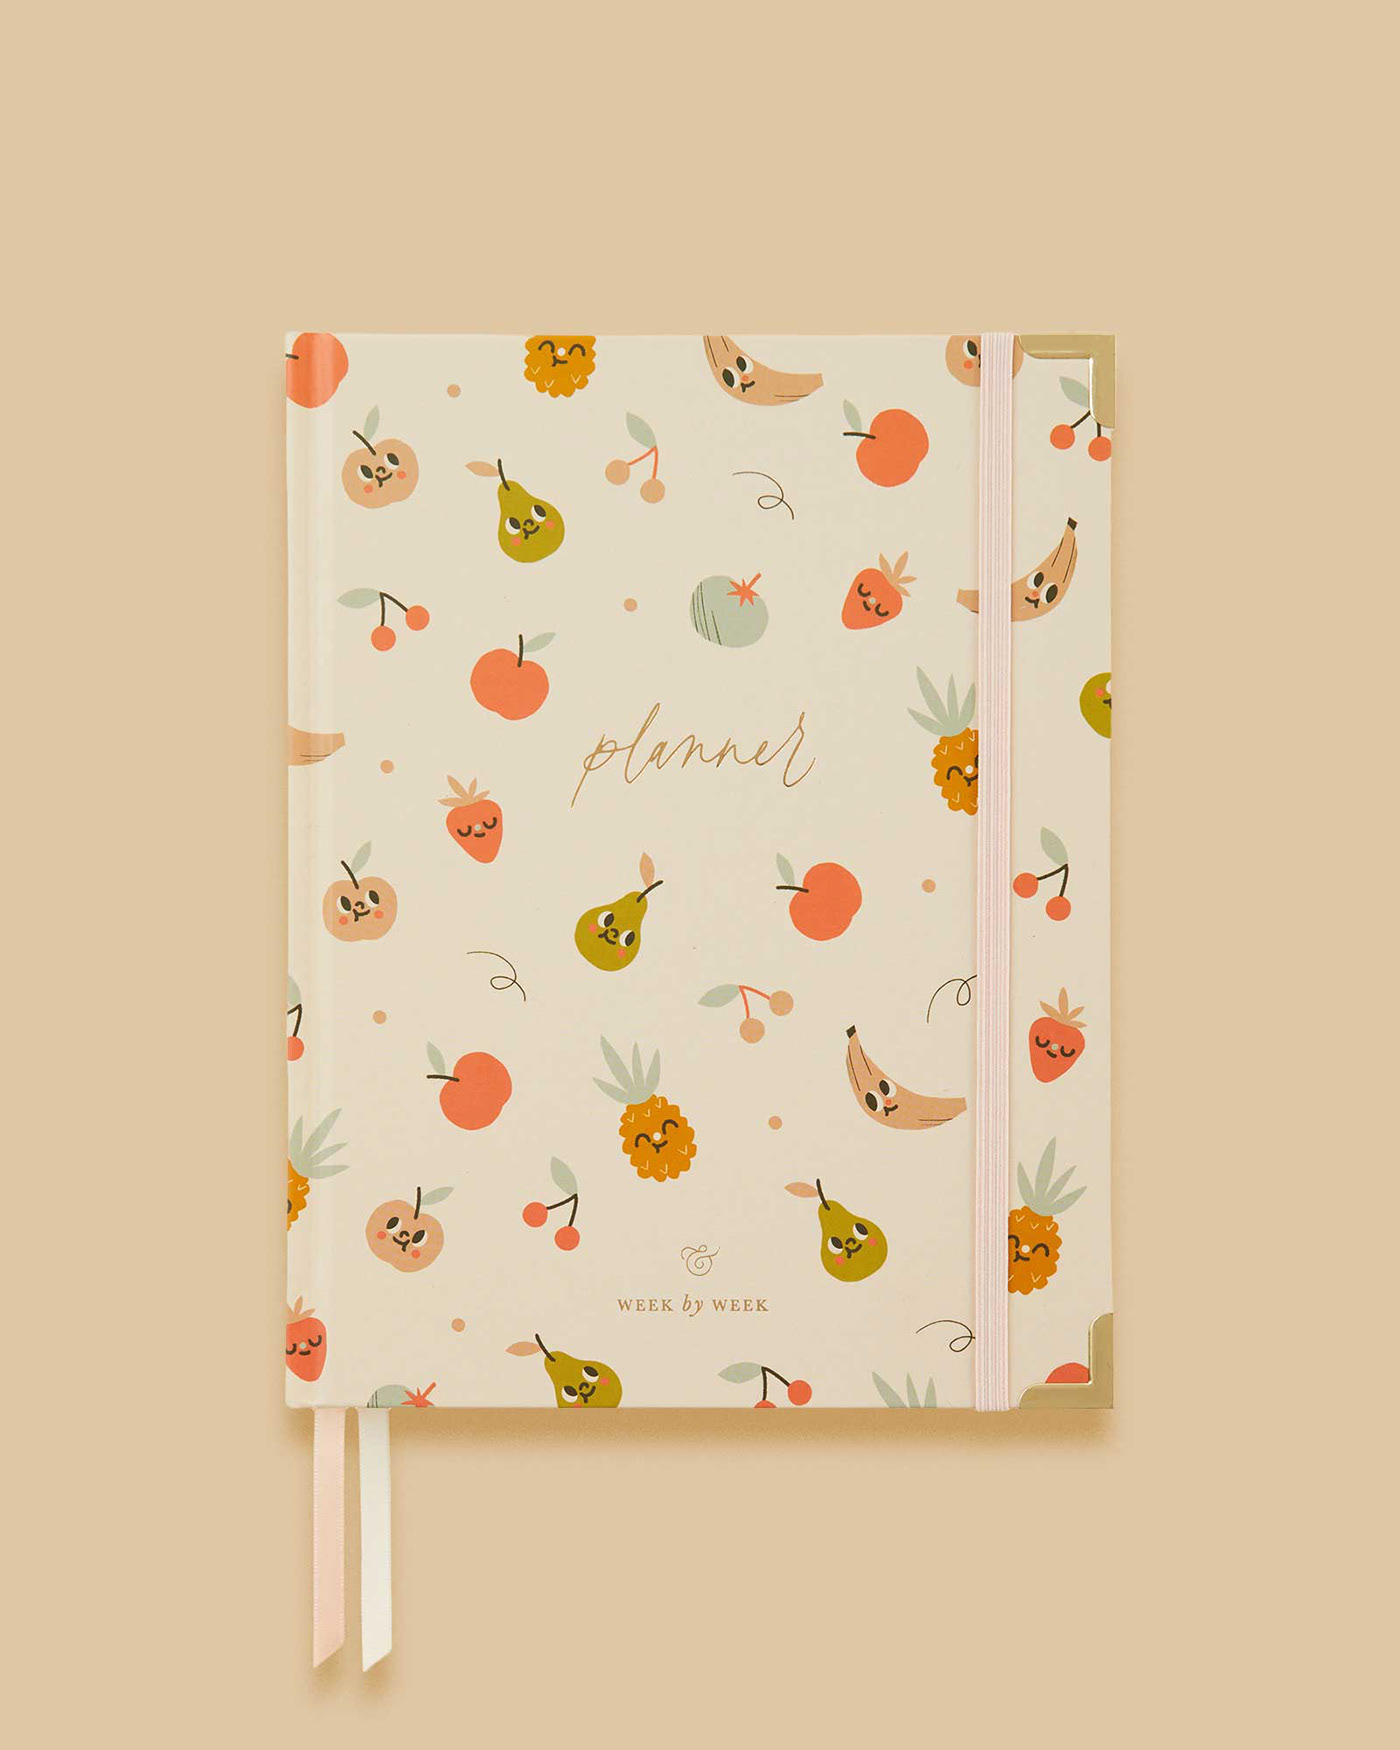 Image of a planner notebook with an illustrated seamless pattern of cute fruits on its cover